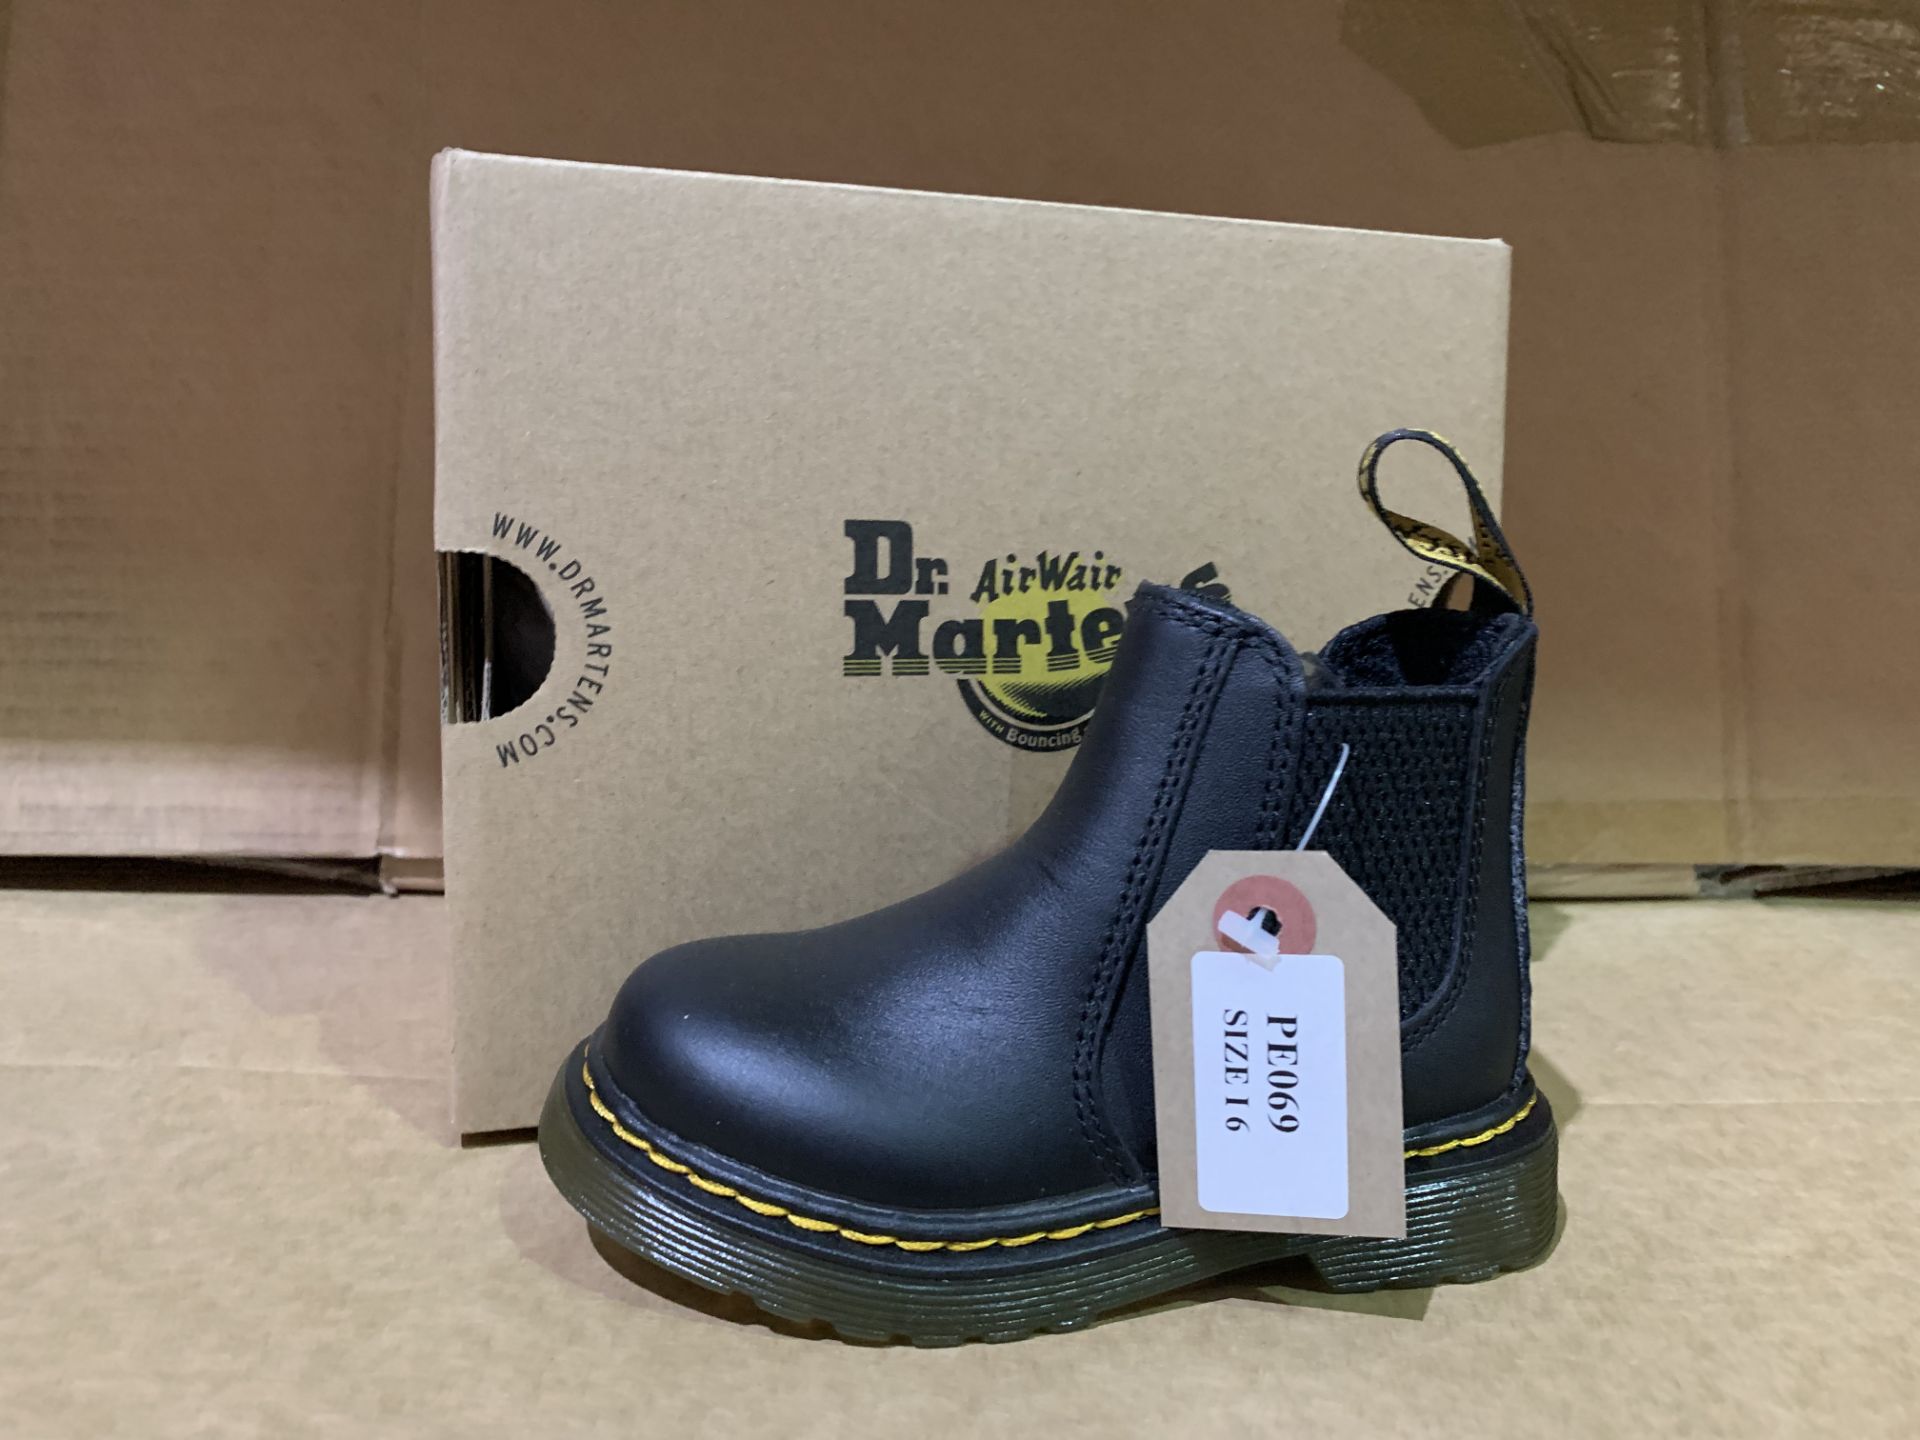 (NO VAT) 3 X BRAND NEW DR MARTENS SOFTY T BOOTS SIZE i6